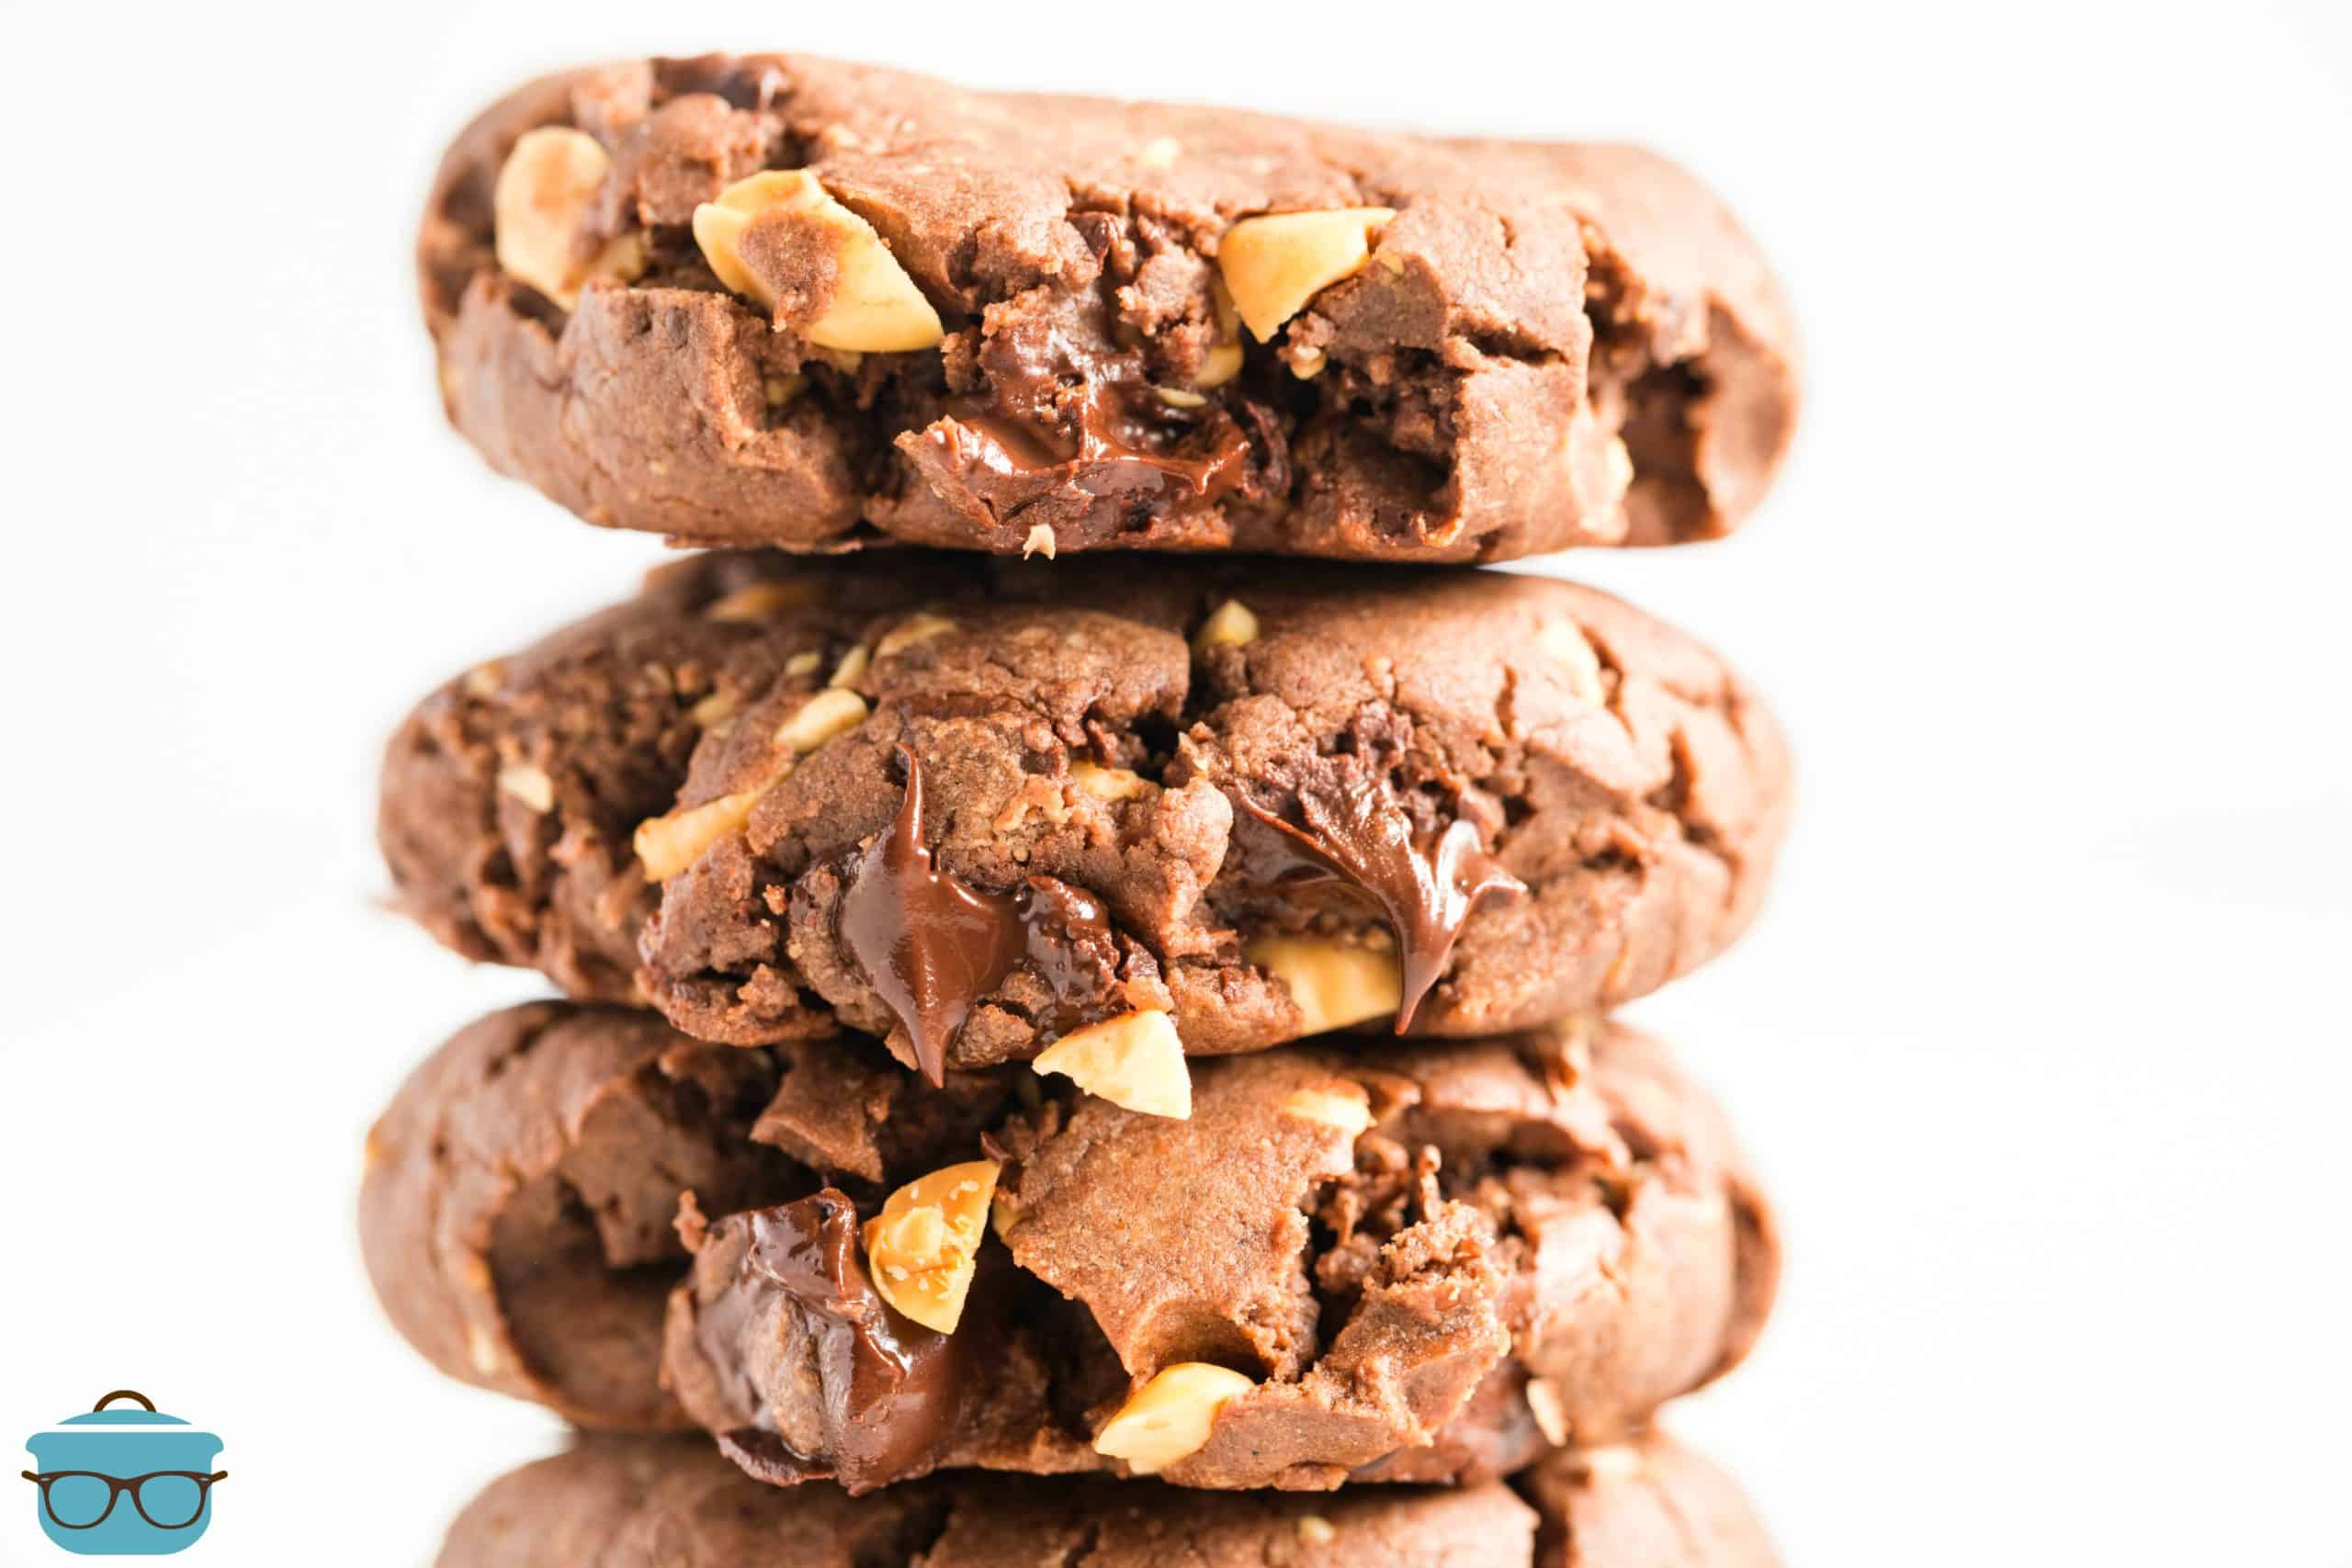 closeup image of Chocolate Peanut Butter Cookies stacked.